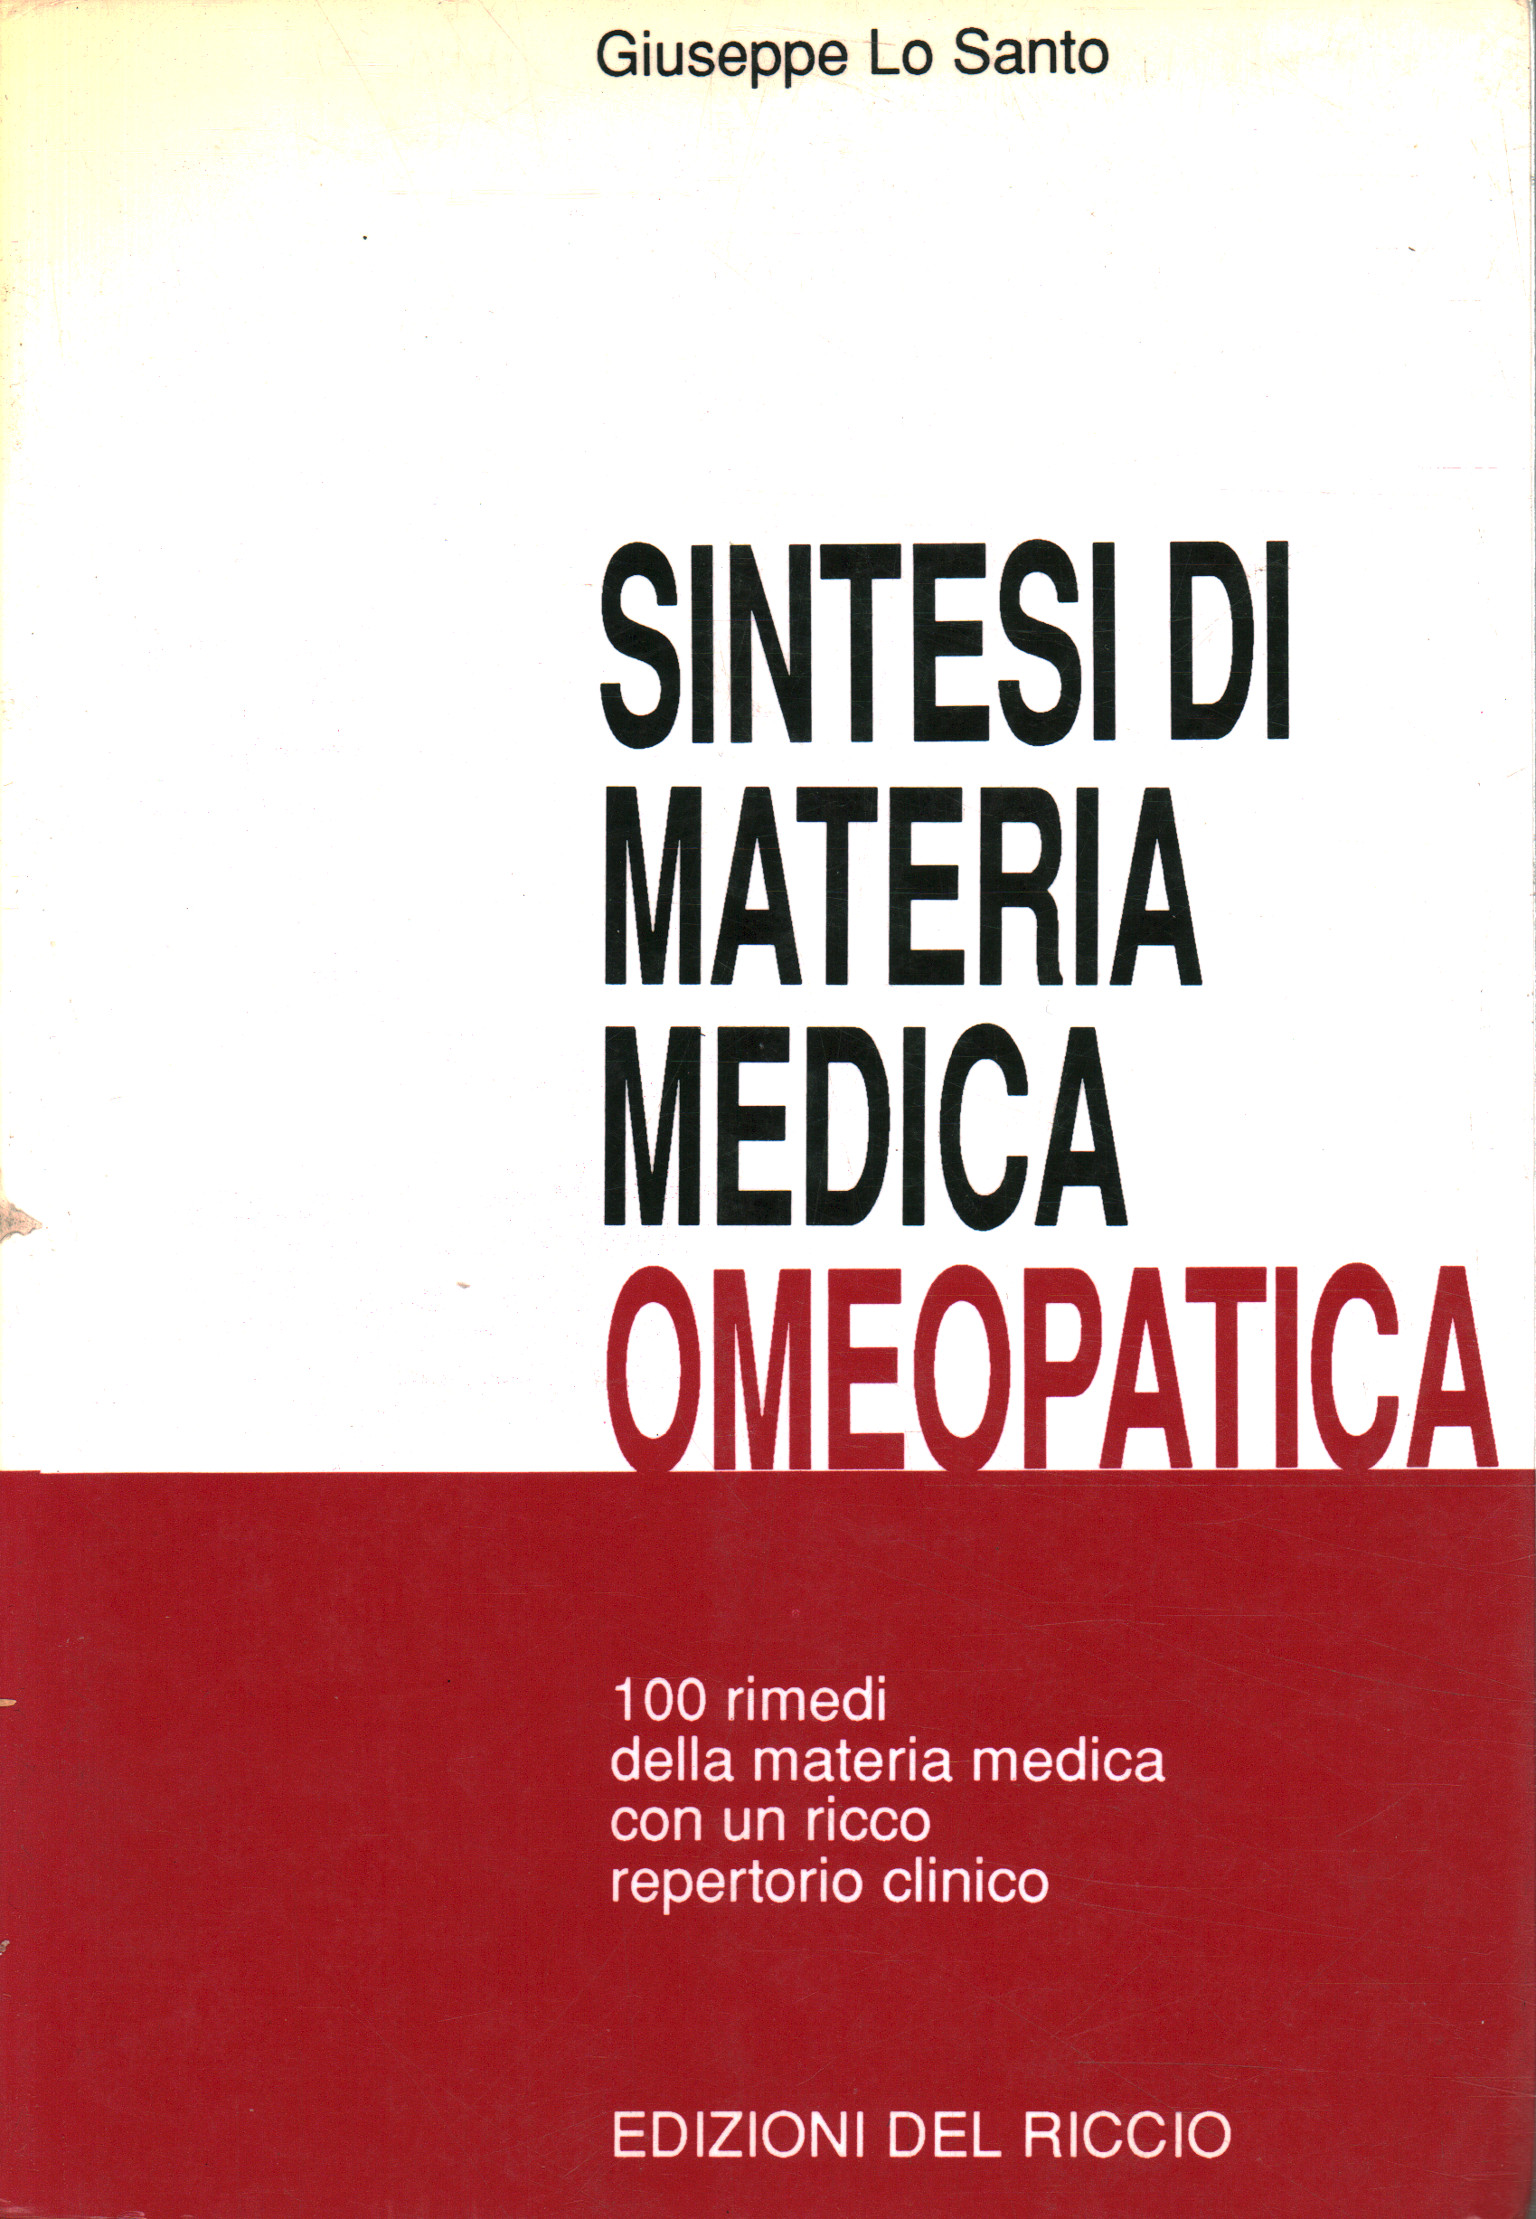 Synthesis of homeopathic materia medica